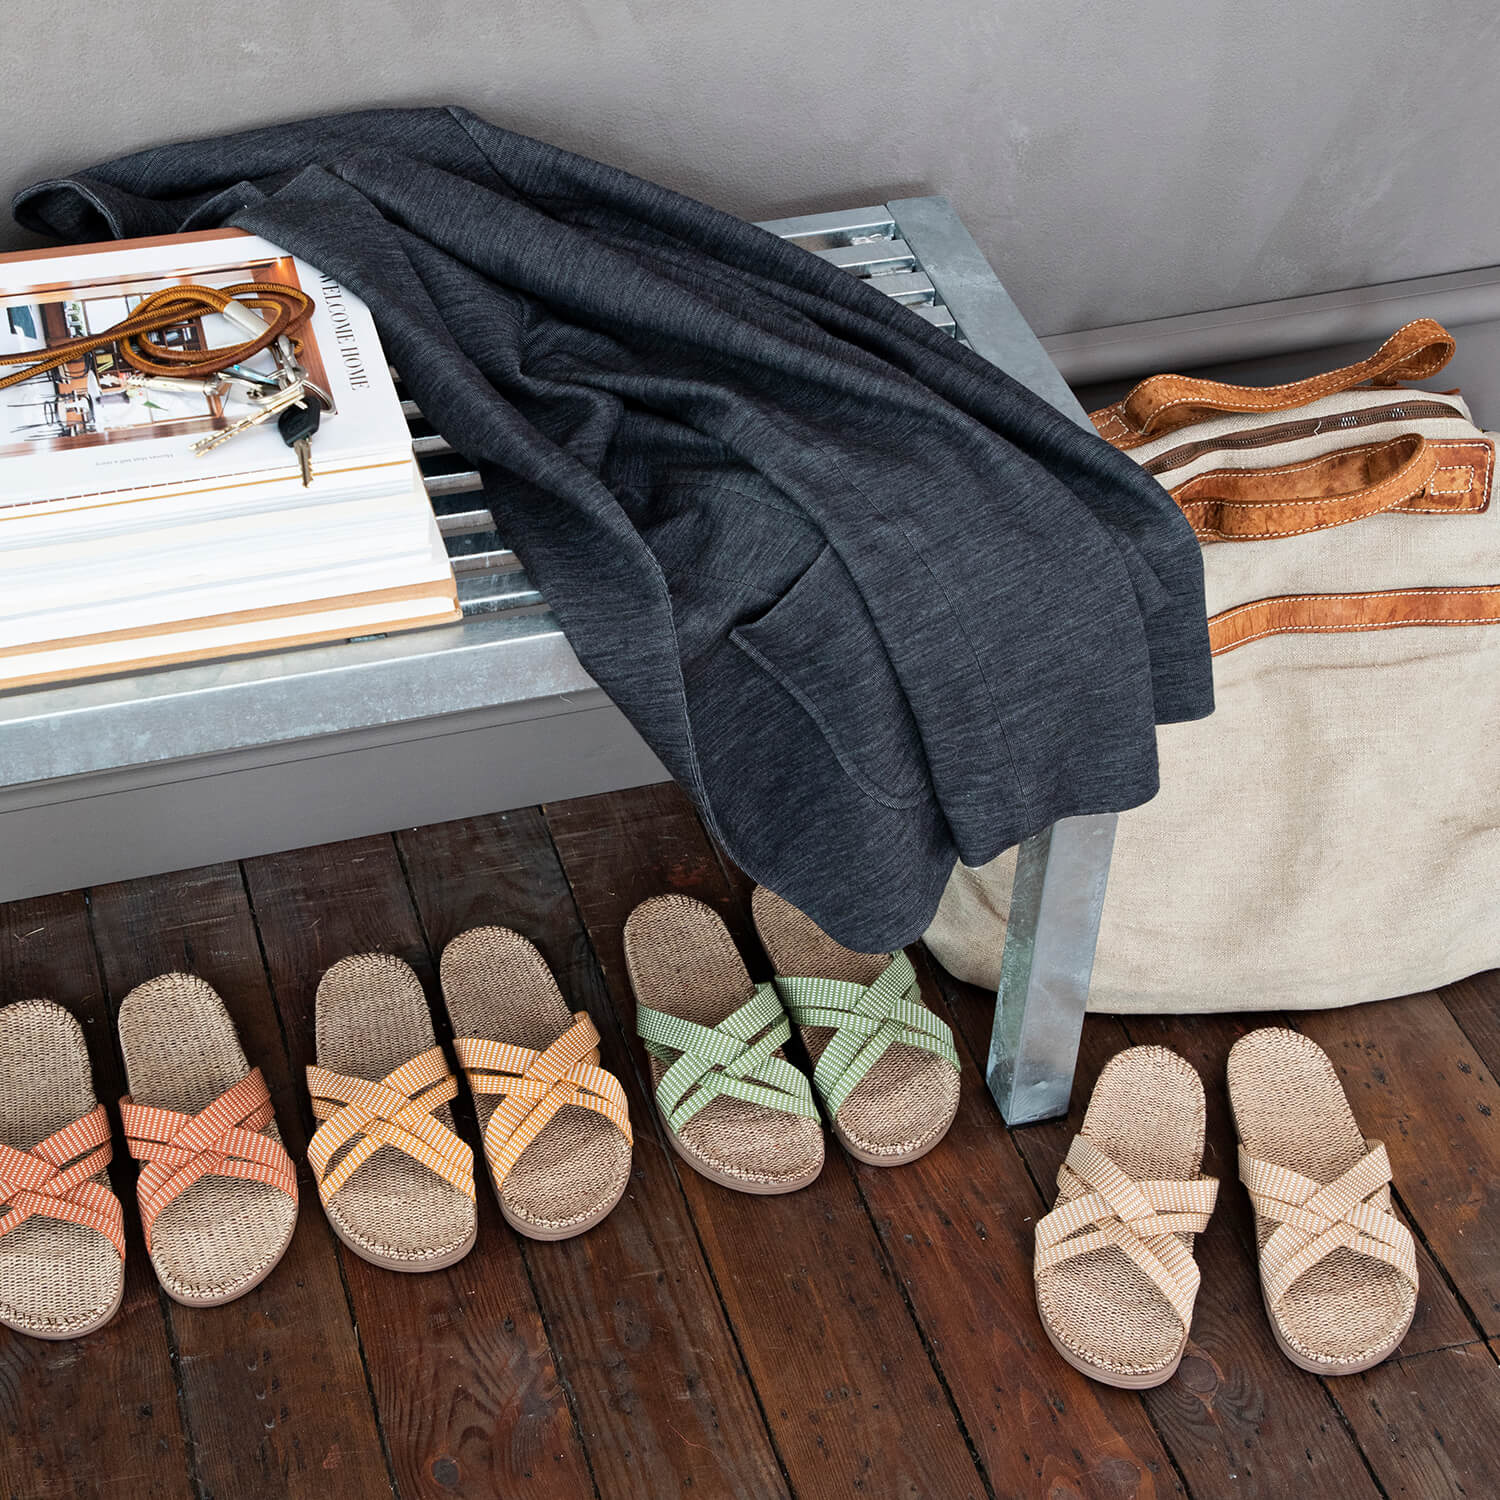 Four pairs of Shangies womens sandals in various colours. They sit on a wooden floor and under a metal bench holding books and a coat